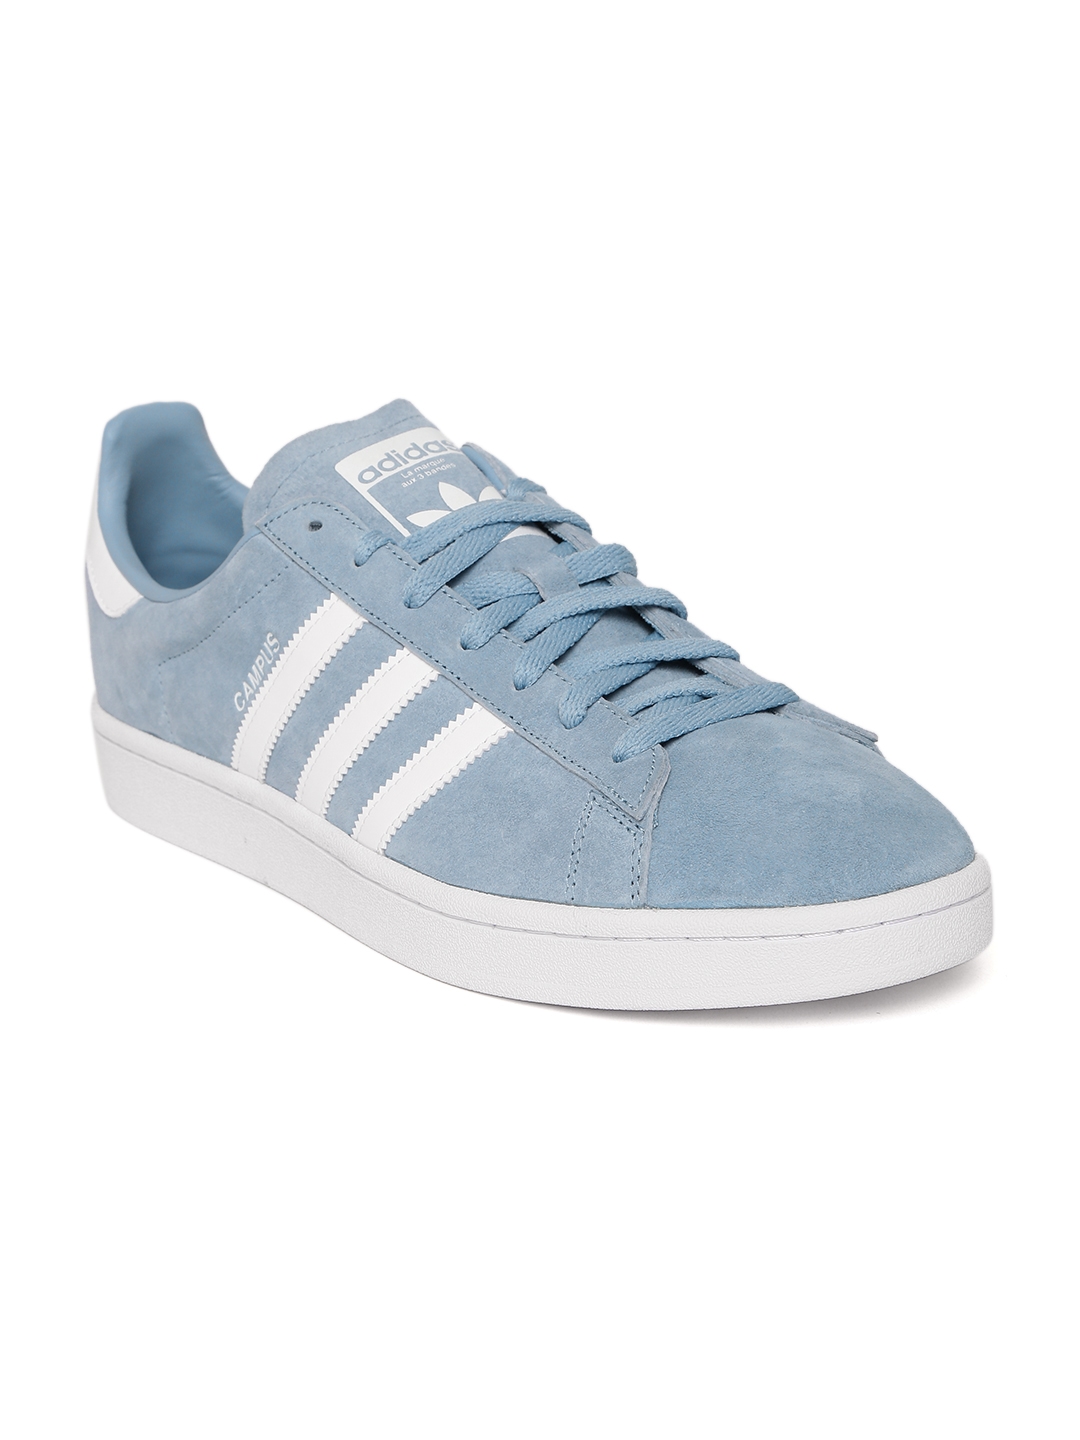 Buy Adidas Men's Stan Smith Casual Shoes (Cloud White/Cloud  White/Collegiate Navy, Size 13.5 US) Online | Kogan.com. With a vegan upper  and an outsole, the Adidas Men’s Stan Smith Casual Shoes have